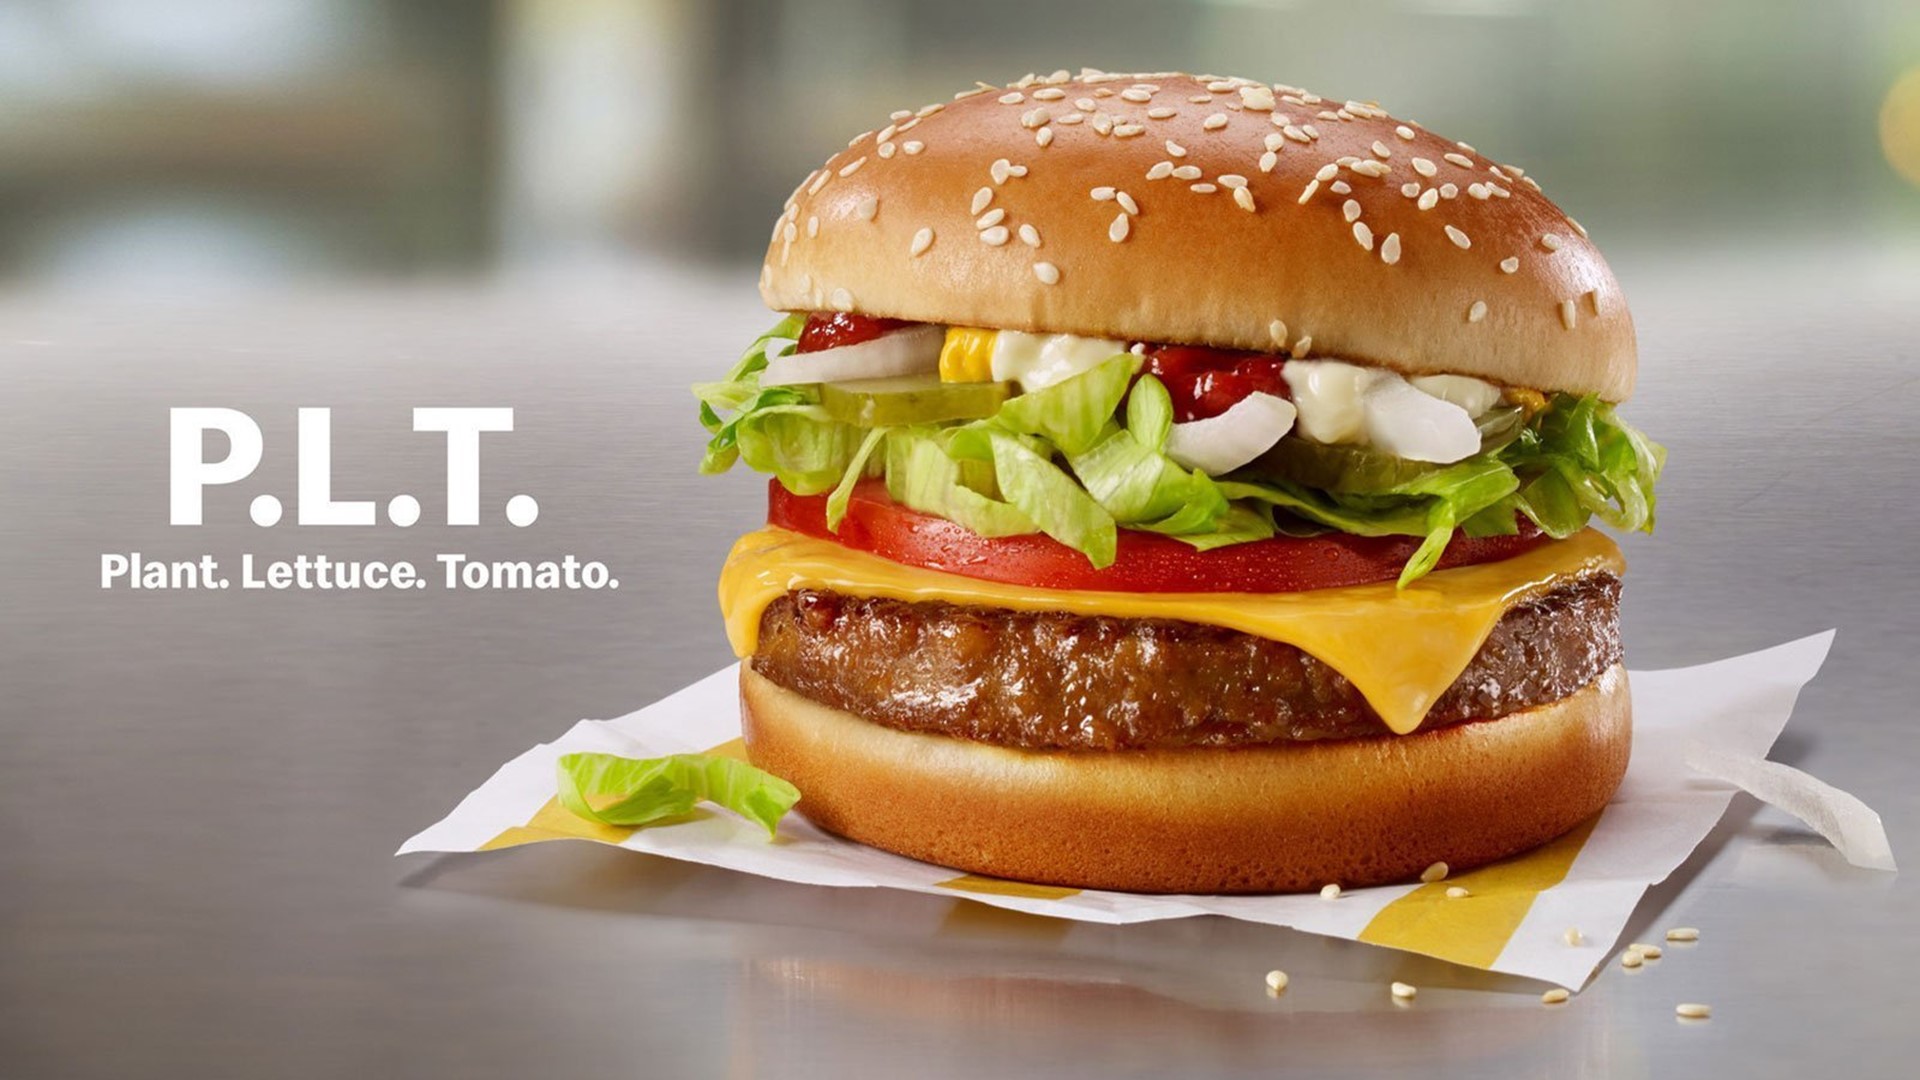 The Beyond Meat burger is coming to McDonald’s | fox43.com